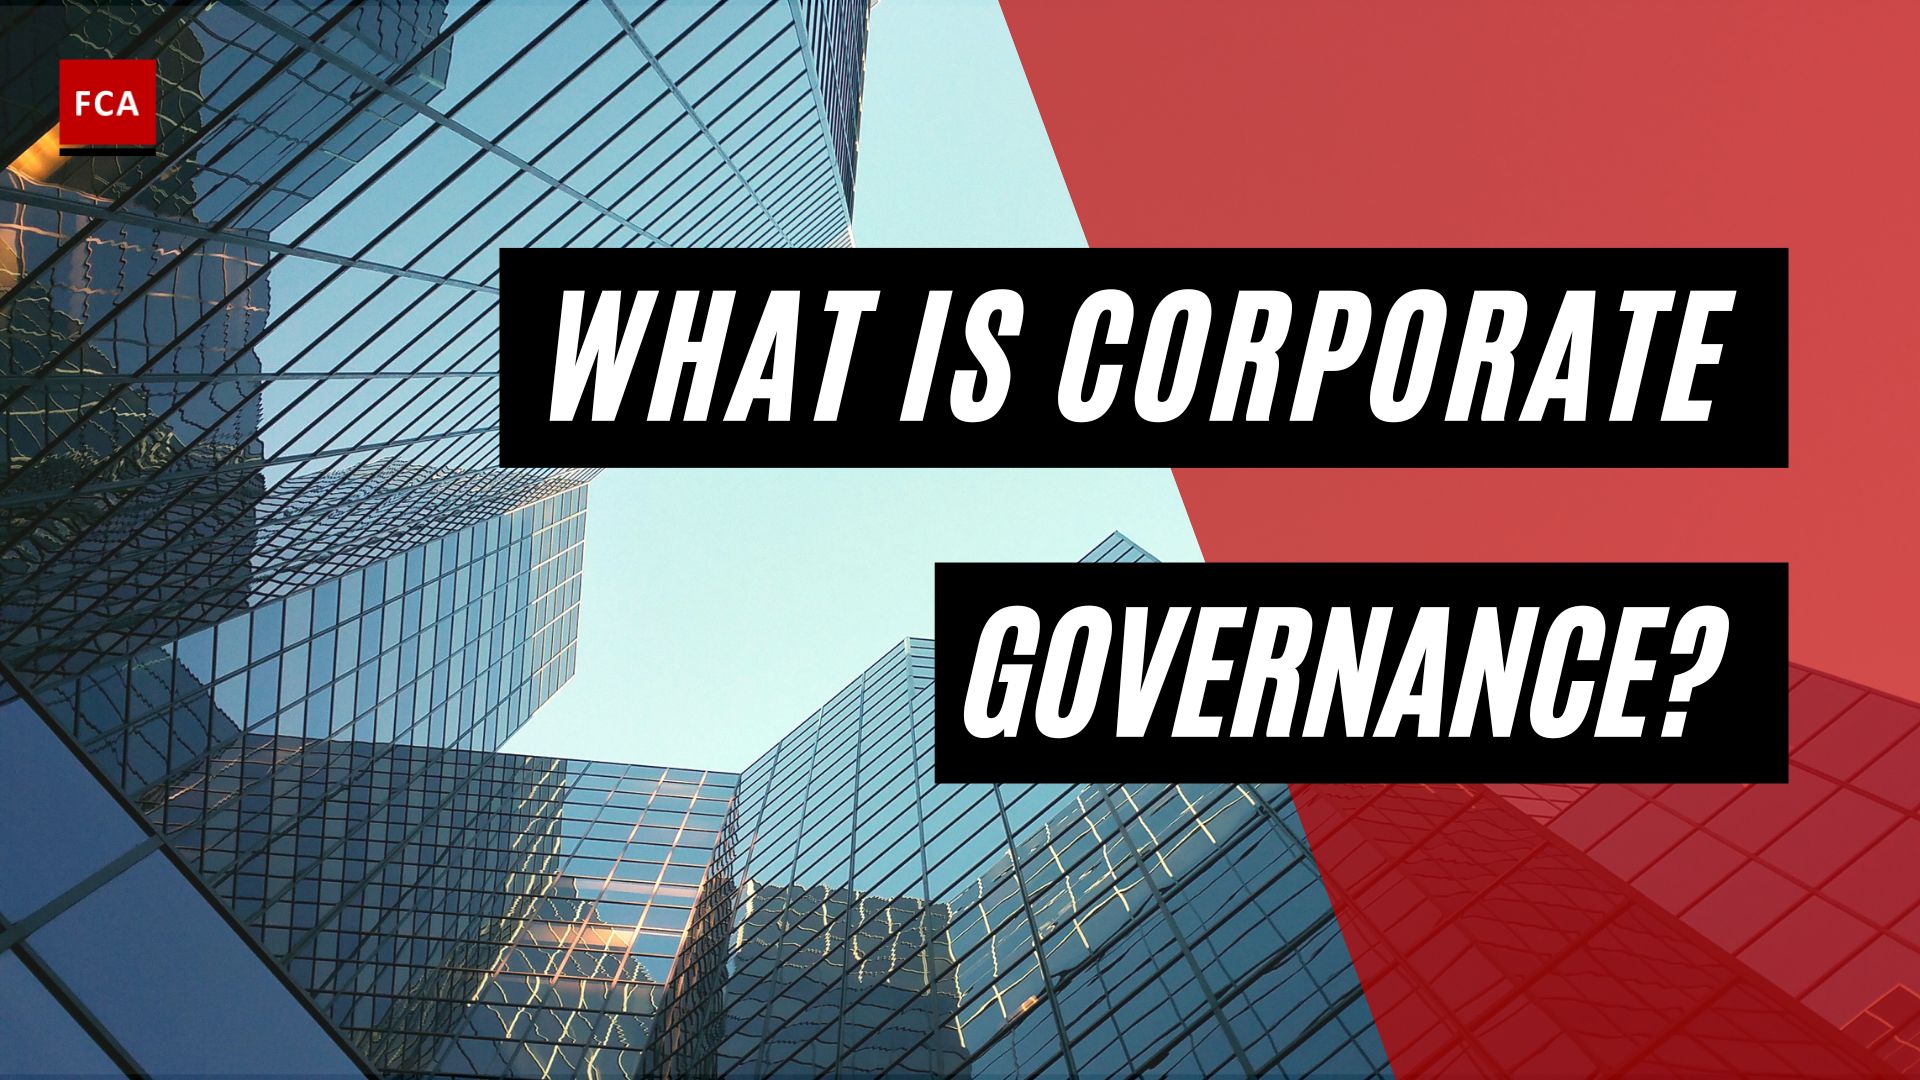 What Is Corporate Governance?